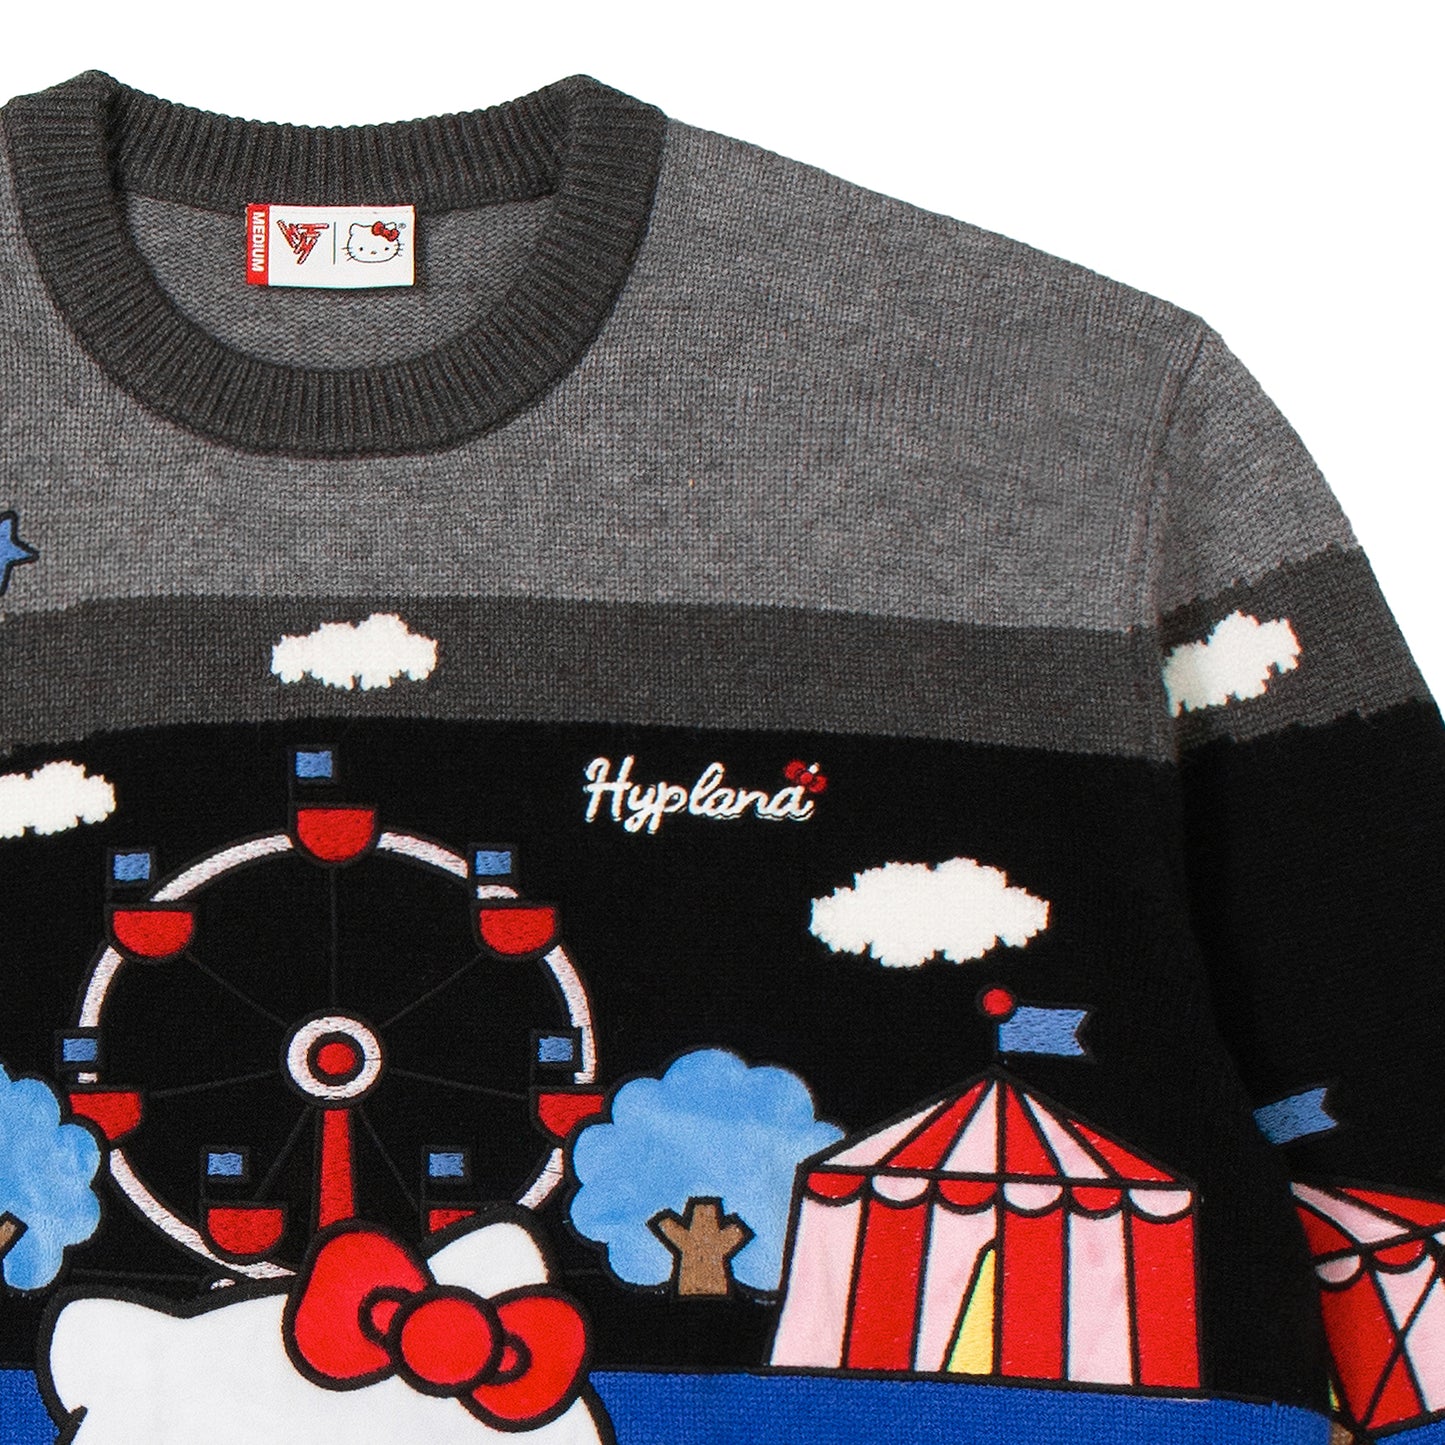 HELLO KITTY CARNIVAL KNIT SWEATER (NIGHT TIME)